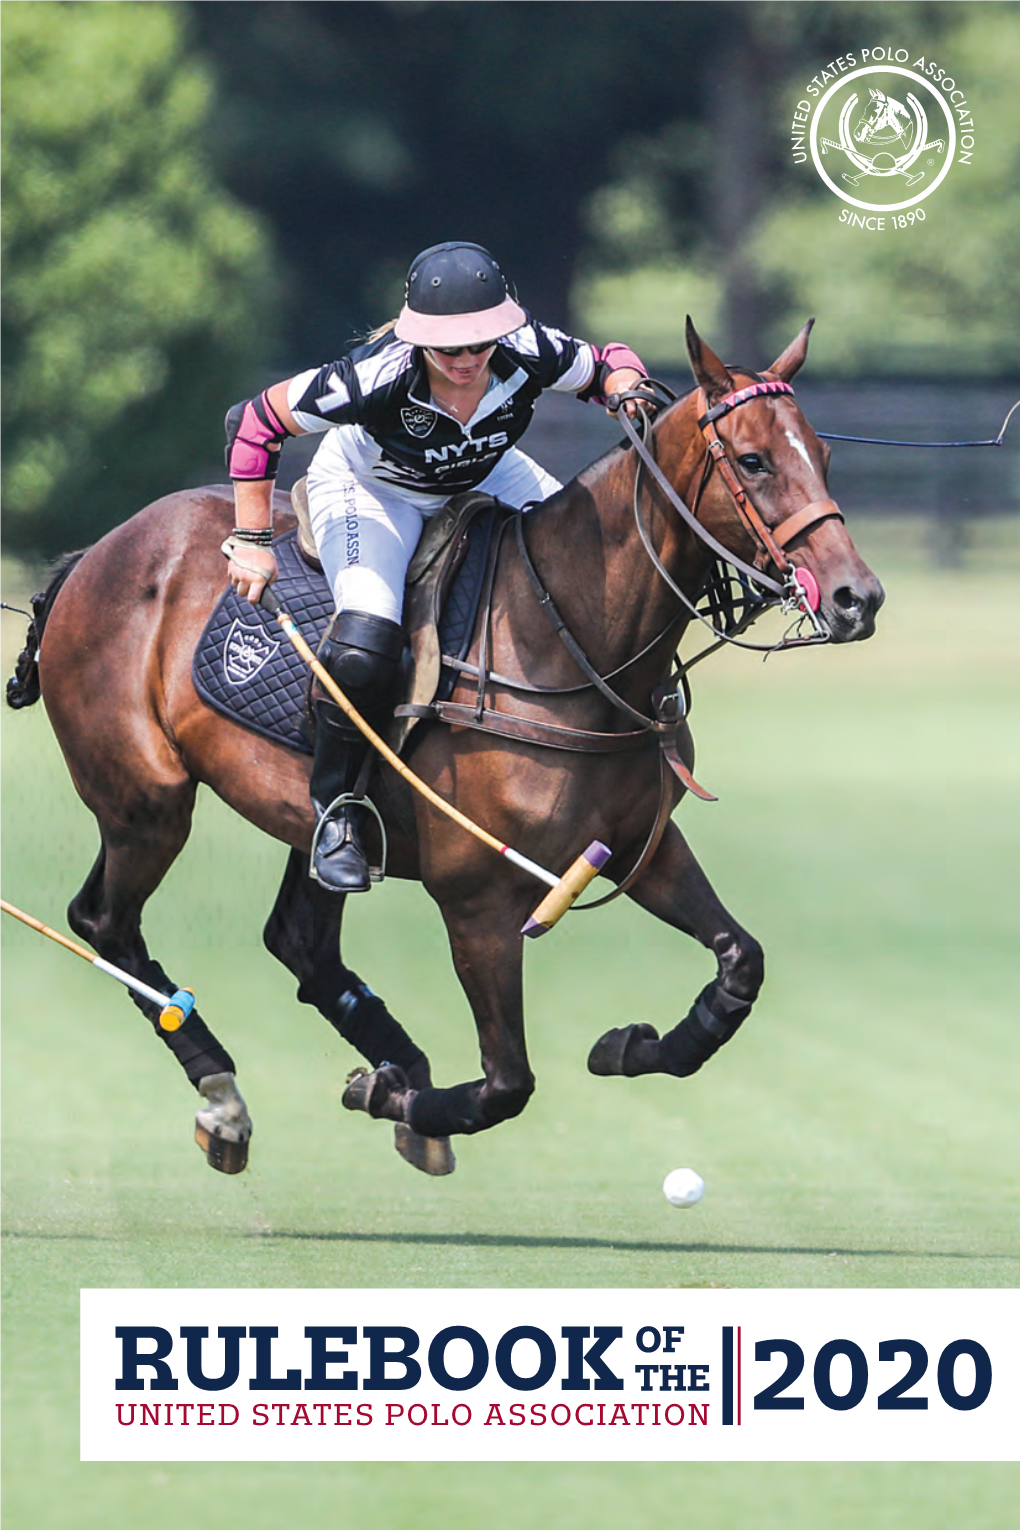 RULEBOOK the UNITED STATES POLO ASSOCIATION 2020 ORGANIZATIONAL DOCUMENTS, RULES, TOURNAMENT CONDITIONS and POLICIES of the UNITED STATES POLO ASSOCIATION® 2020